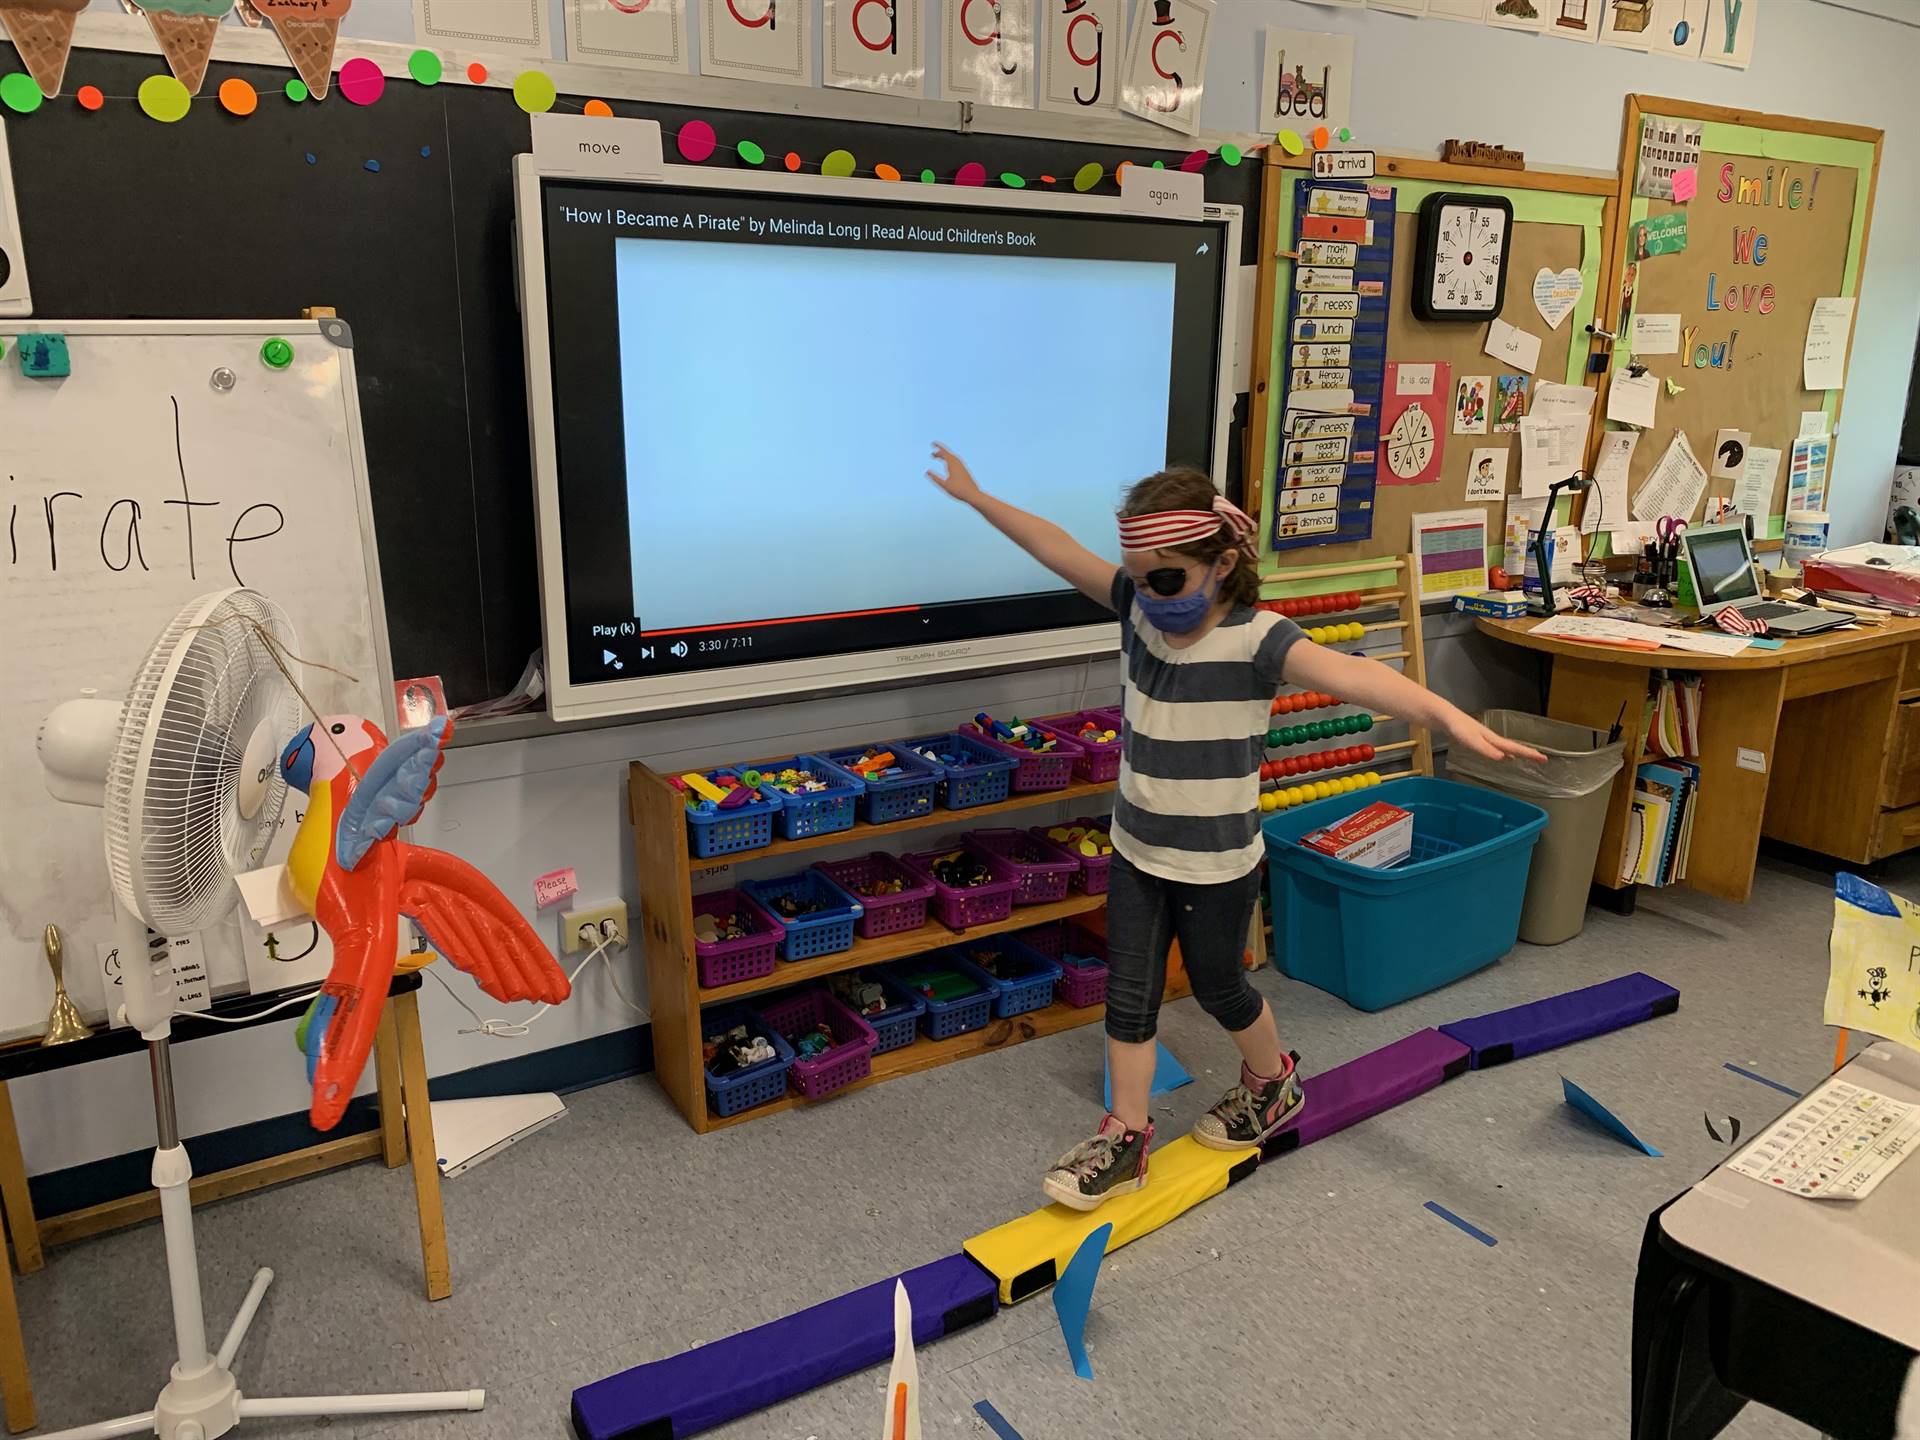 A student pirate walking the "plank".